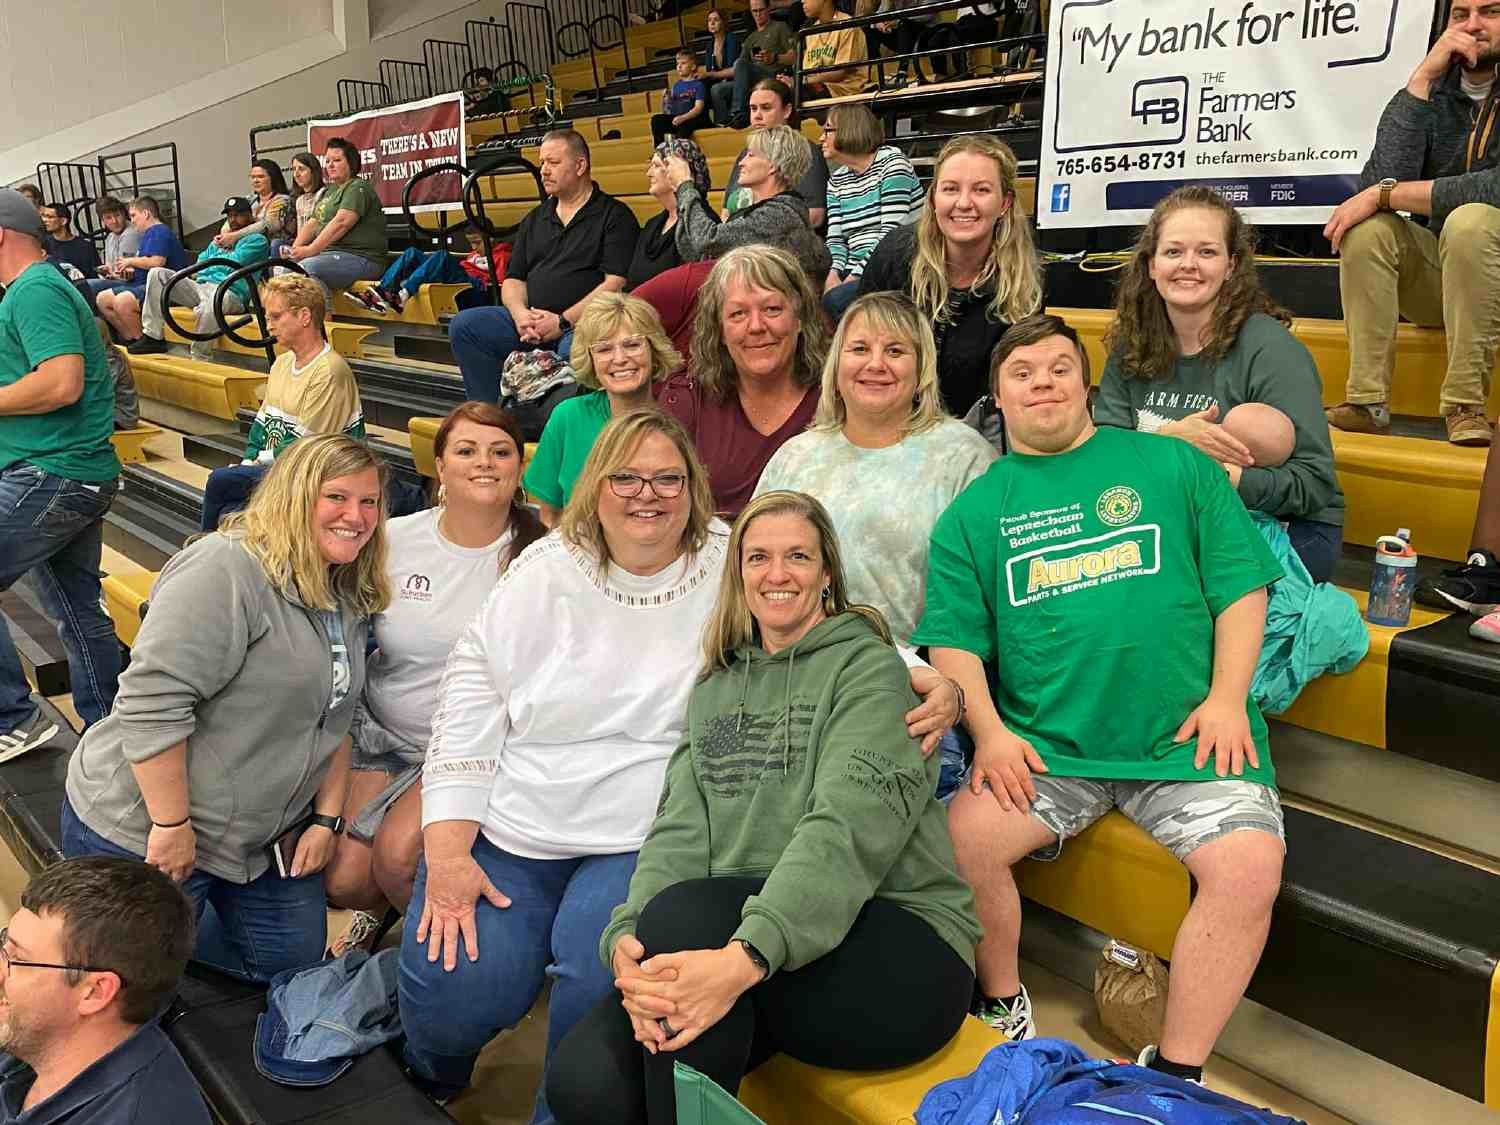 Our team celebrating at a local basketball game